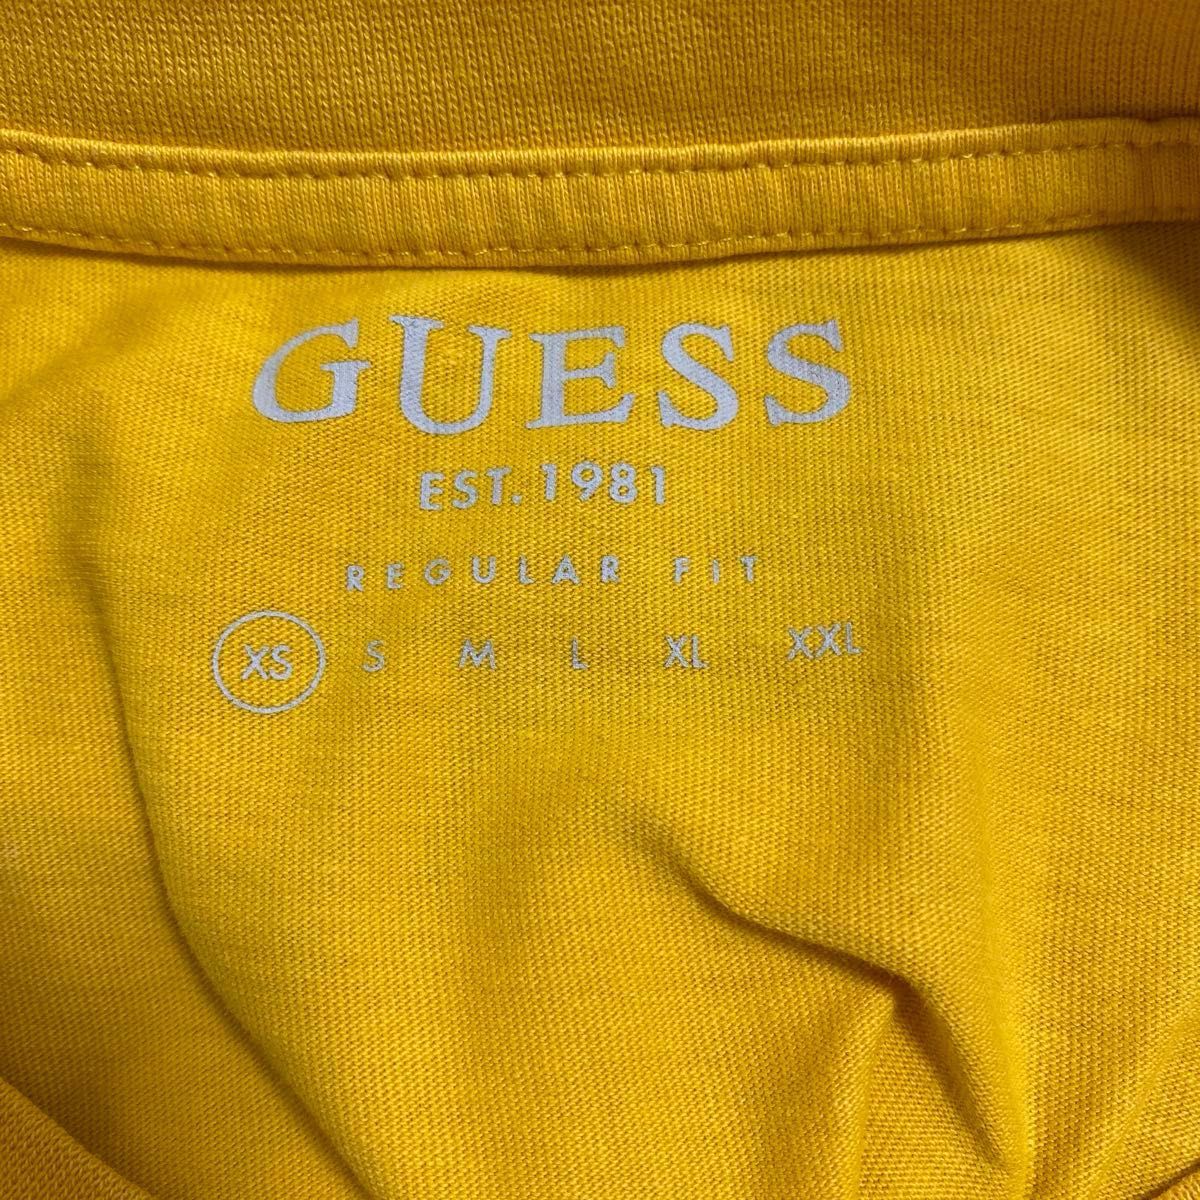 GUESS  Tシャツ  半袖    XS